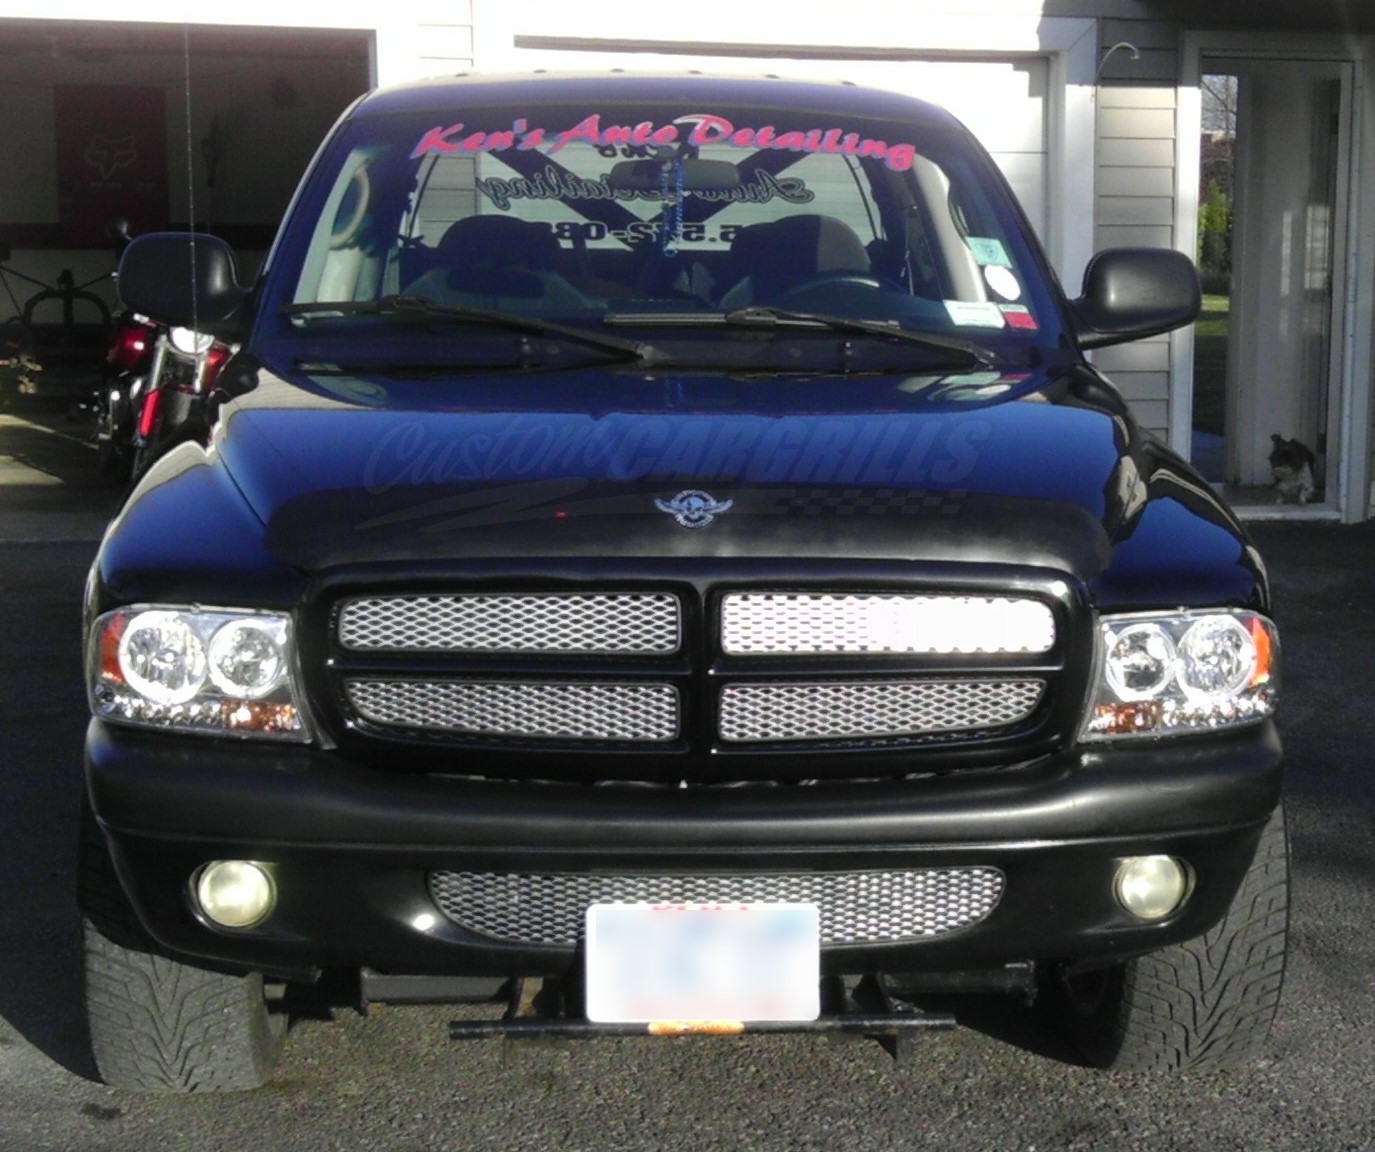 Custom Grill Mesh Kits for Dodge Vehicles by customcargrills.com